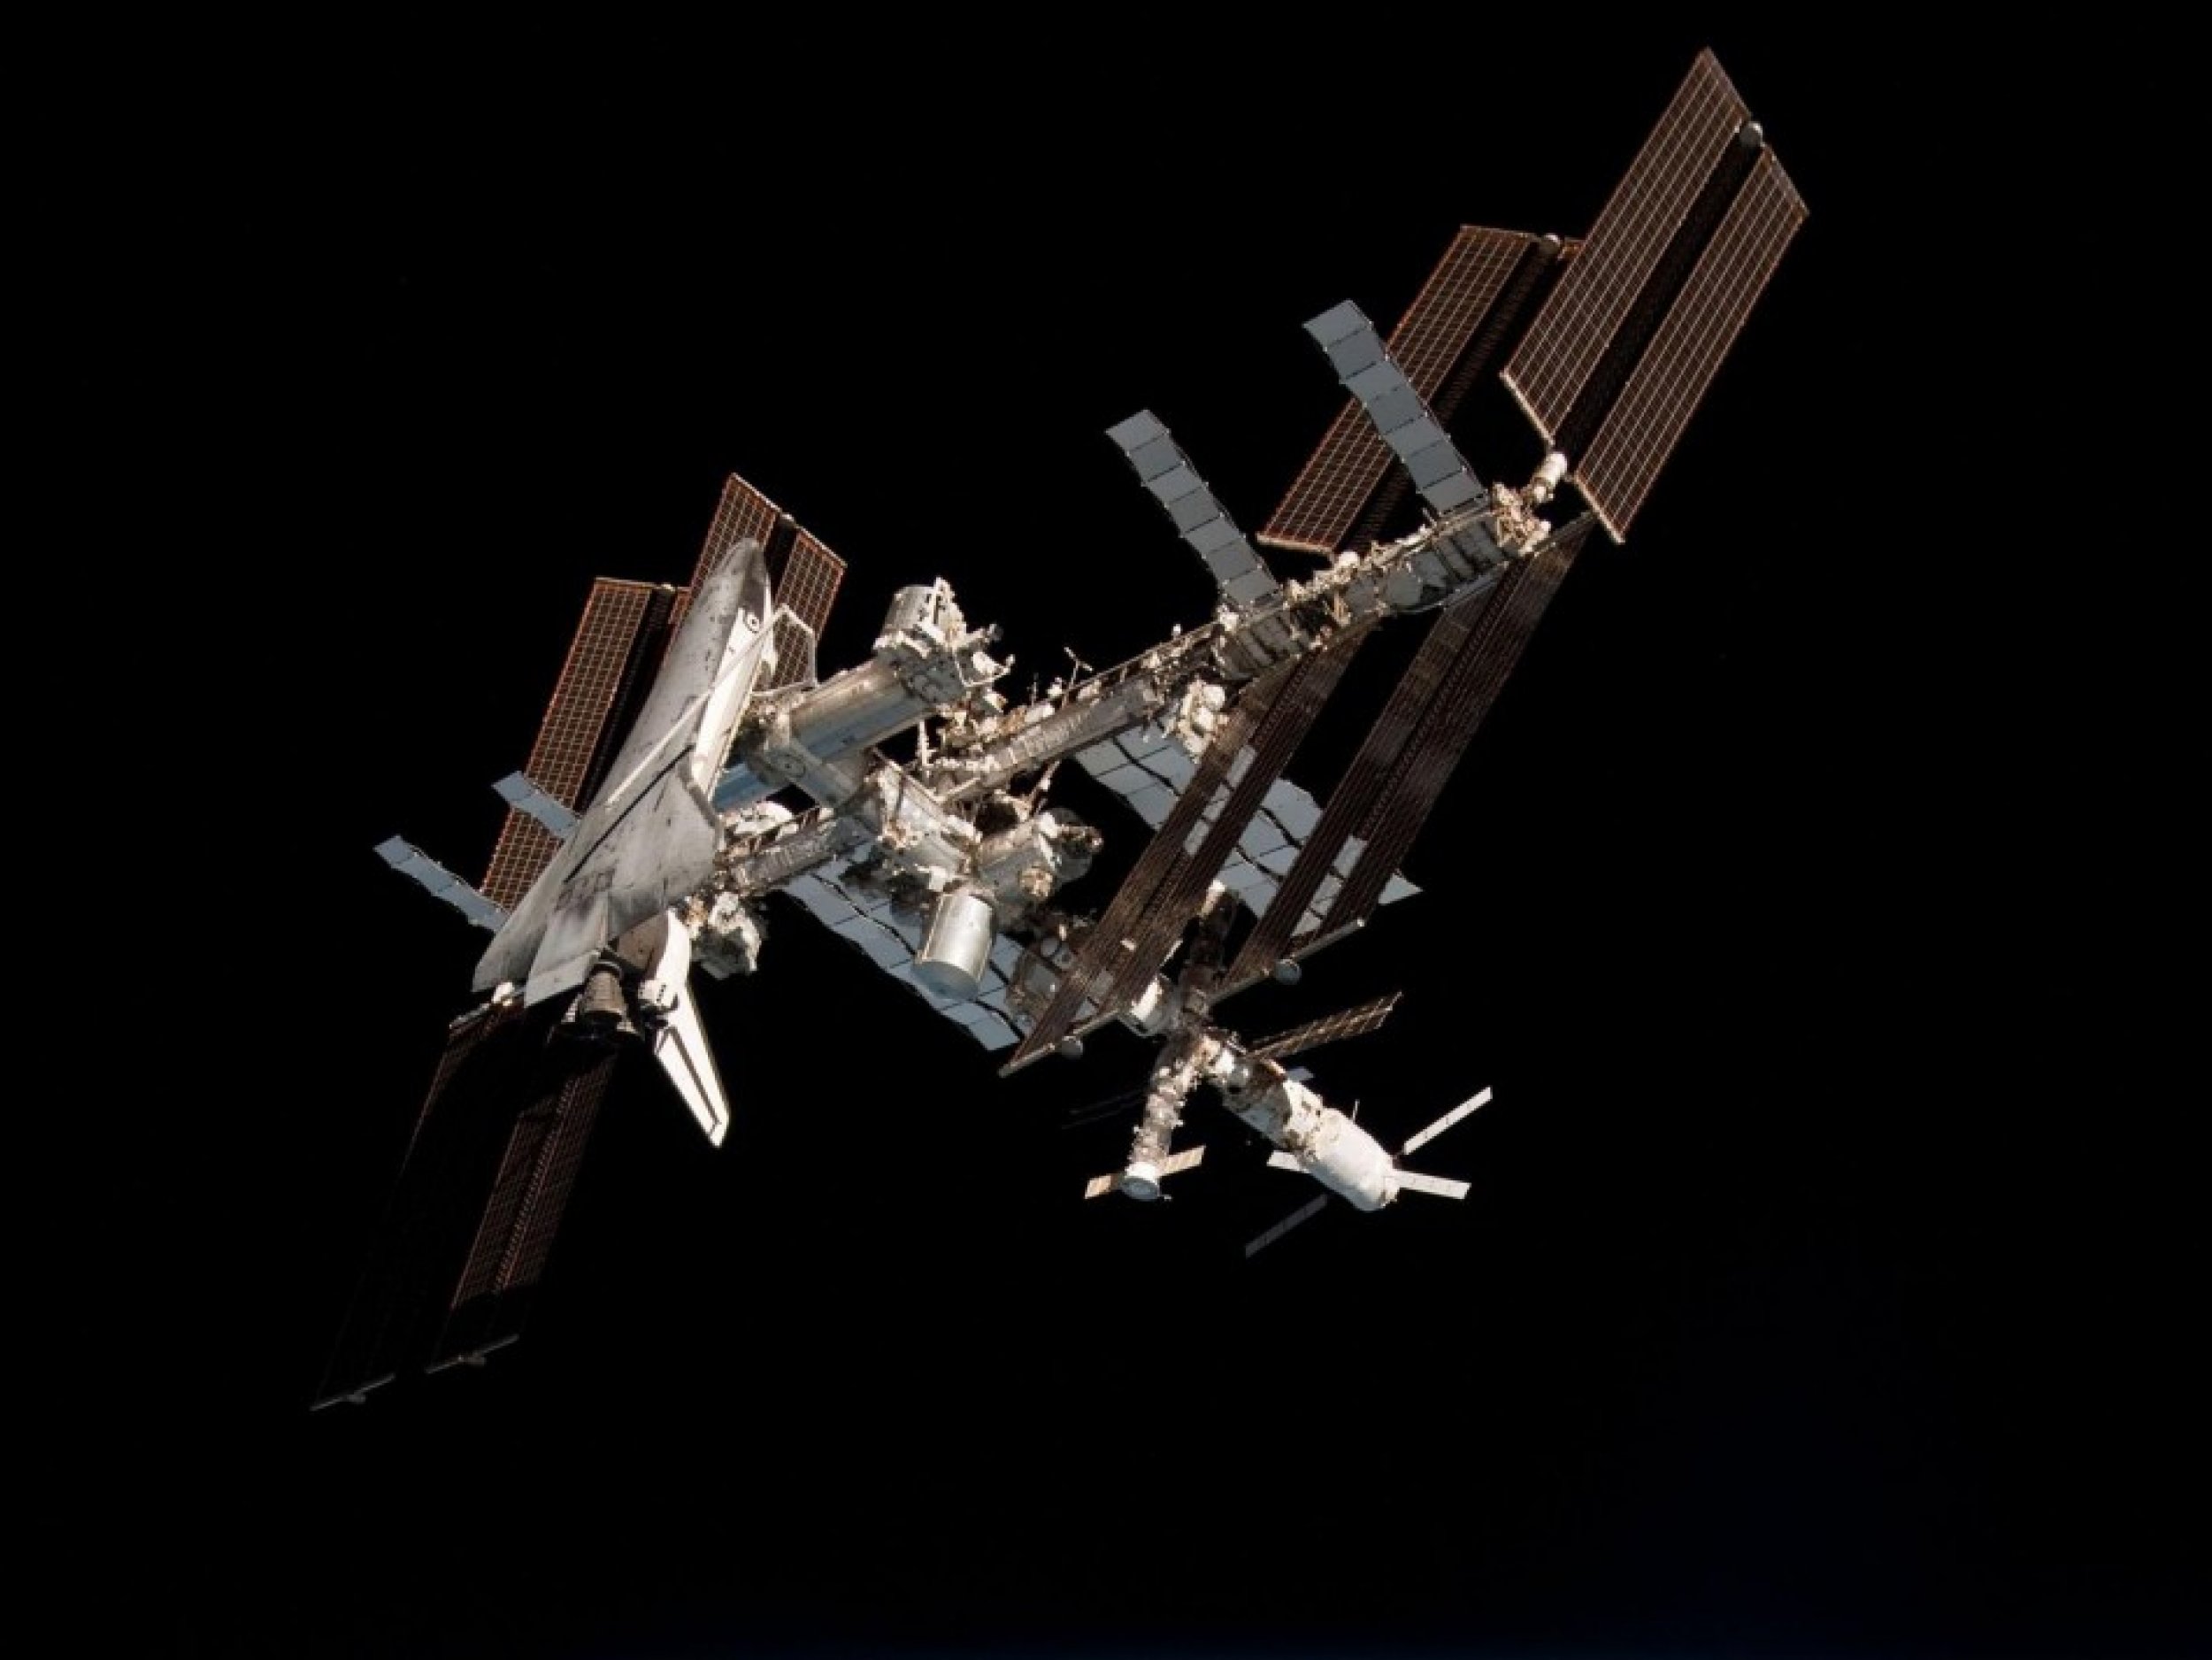 The International Space Station and the Docked Space Shuttle Endeavour